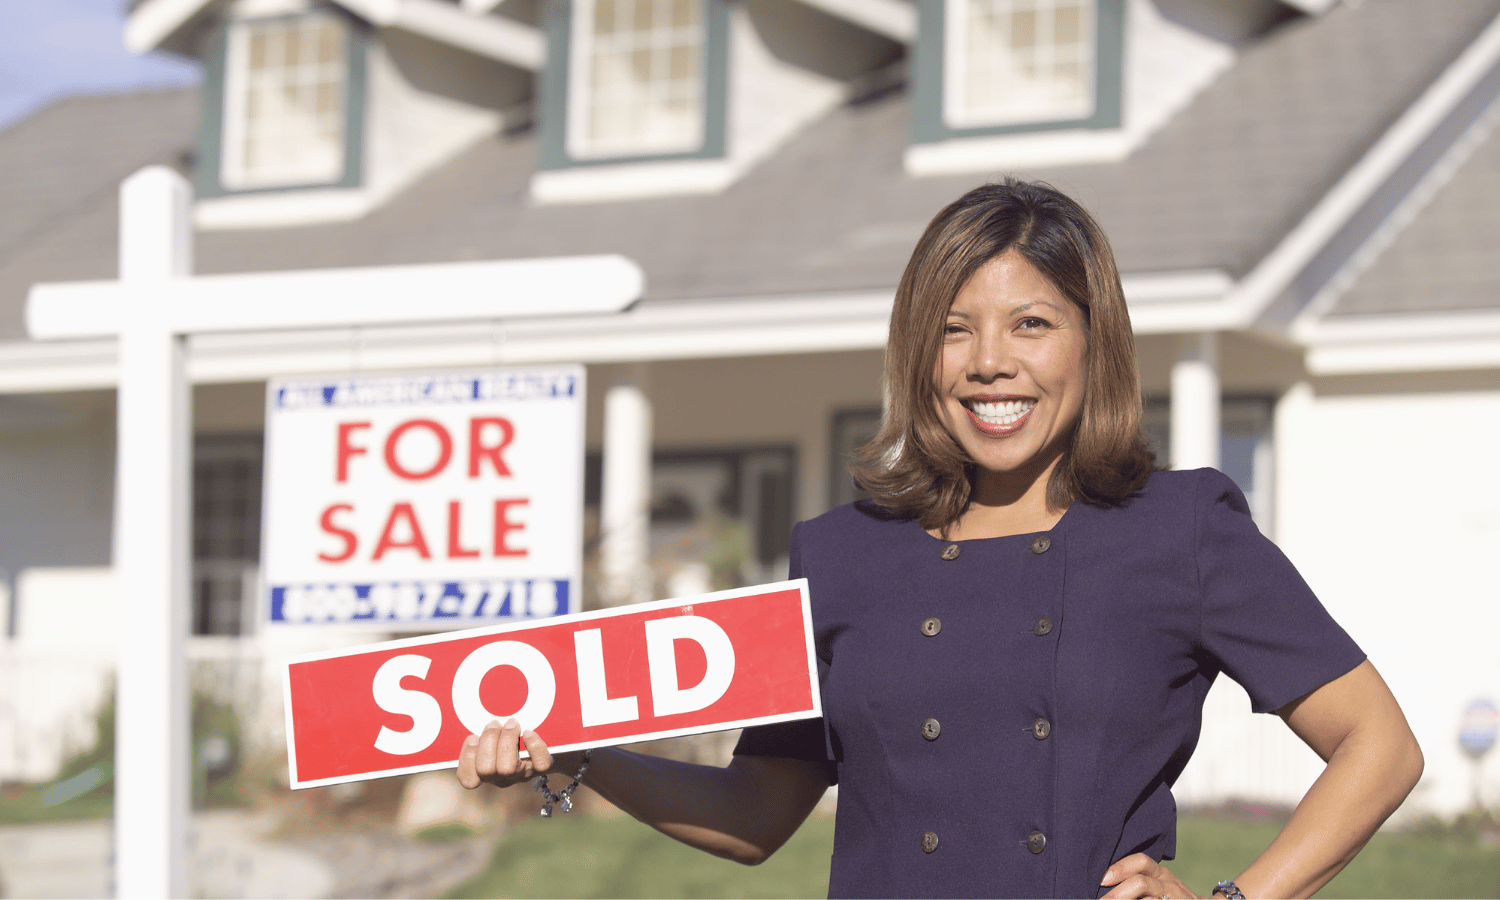 How to Add Value as a Real Estate Agent